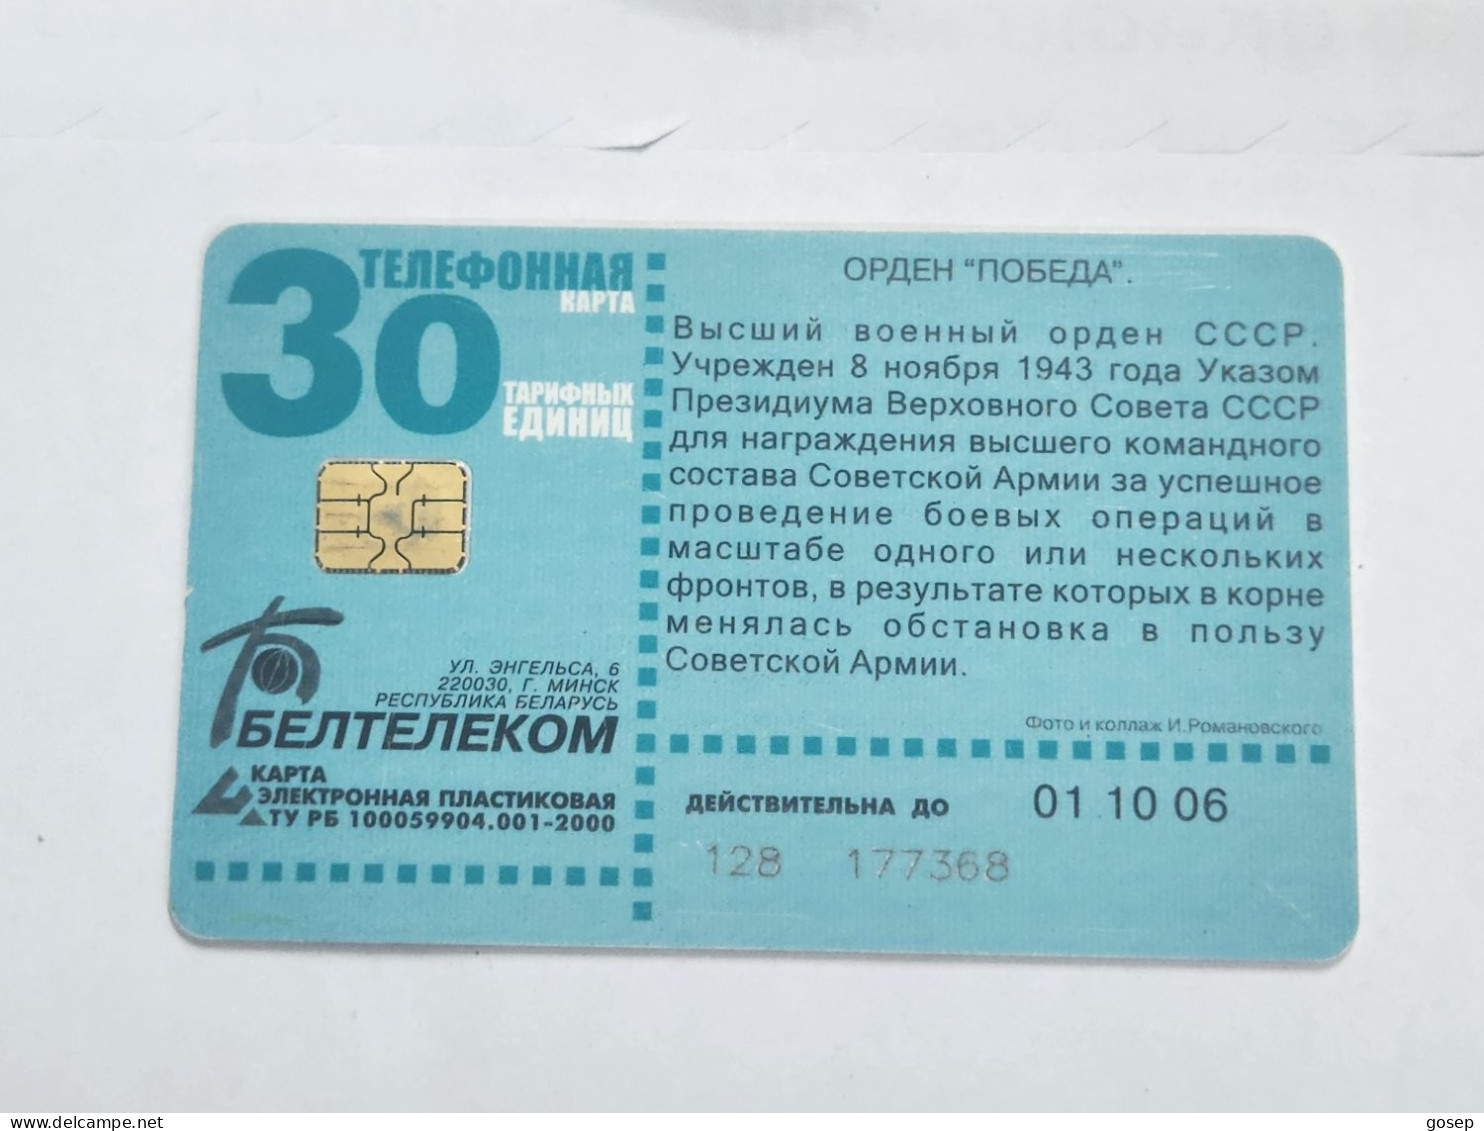 BELARUS-(BY-BLT-128a)-60th Anniversary Victoria-(111)(GOLD CHIP)(177368)(tirage-188.000)used Card+1card Prepiad Free - Belarus